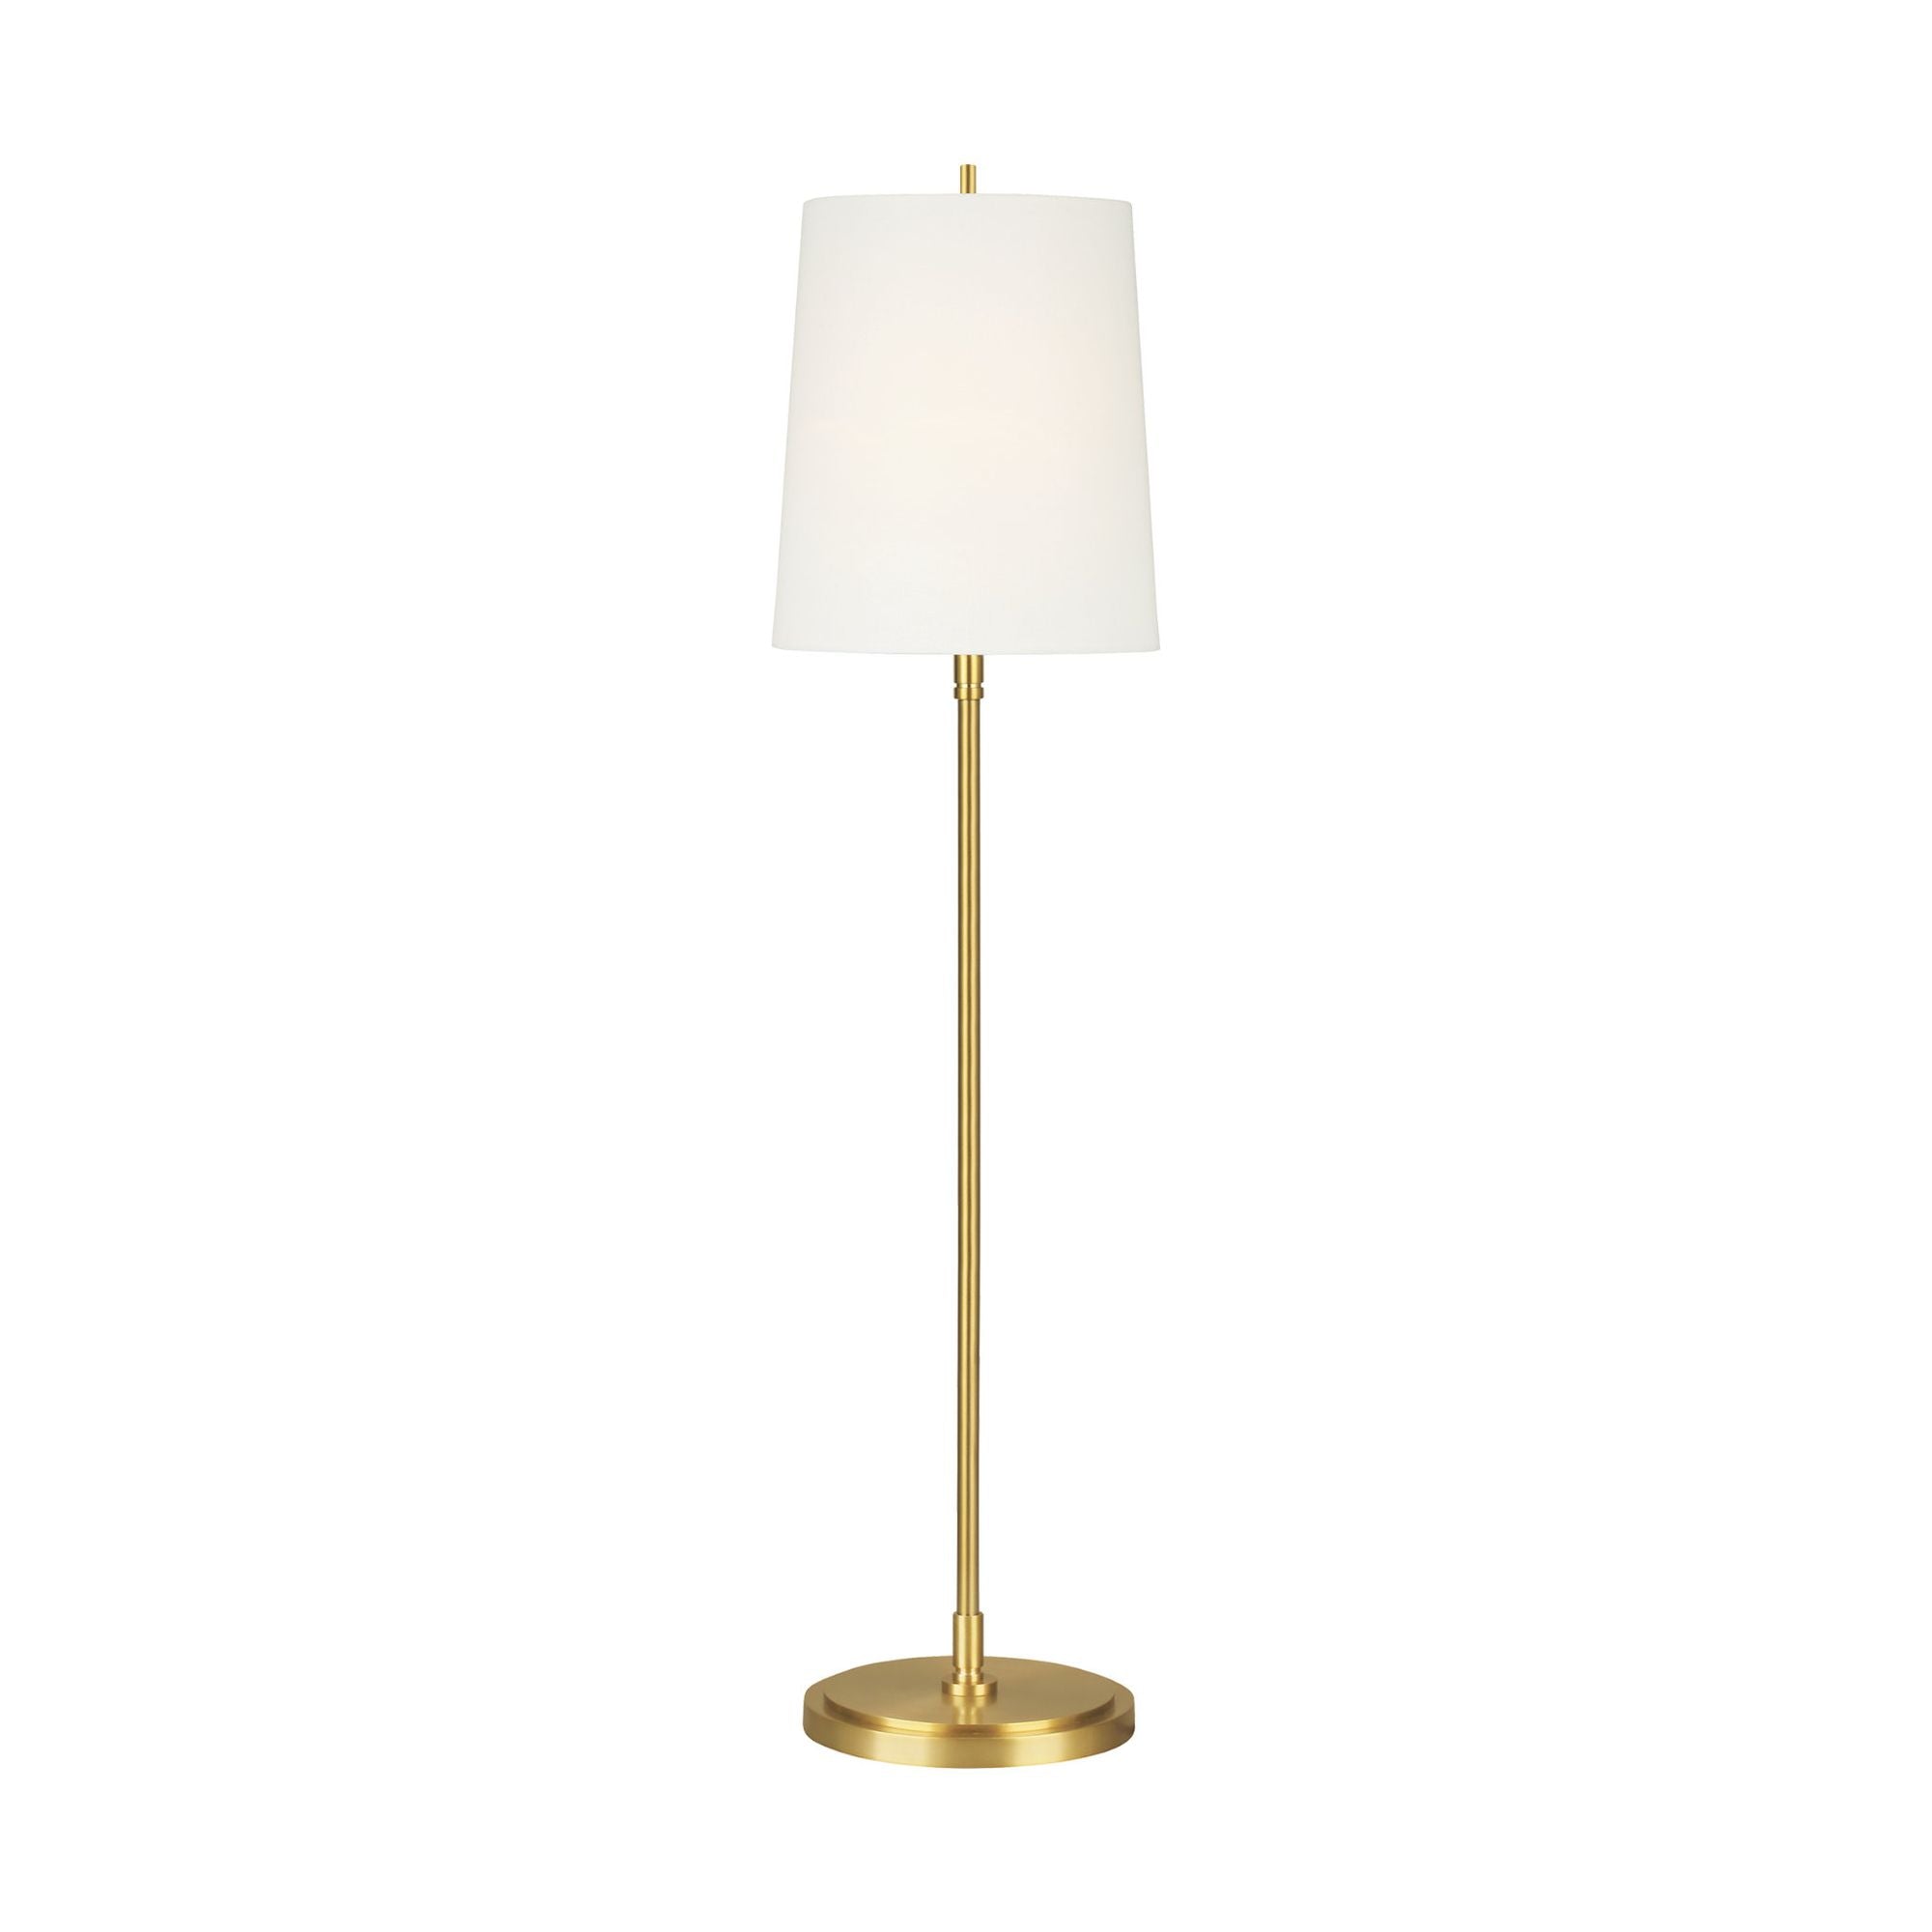 Thomas O'Brien Beckham Classic Floor Lamp in Burnished Brass